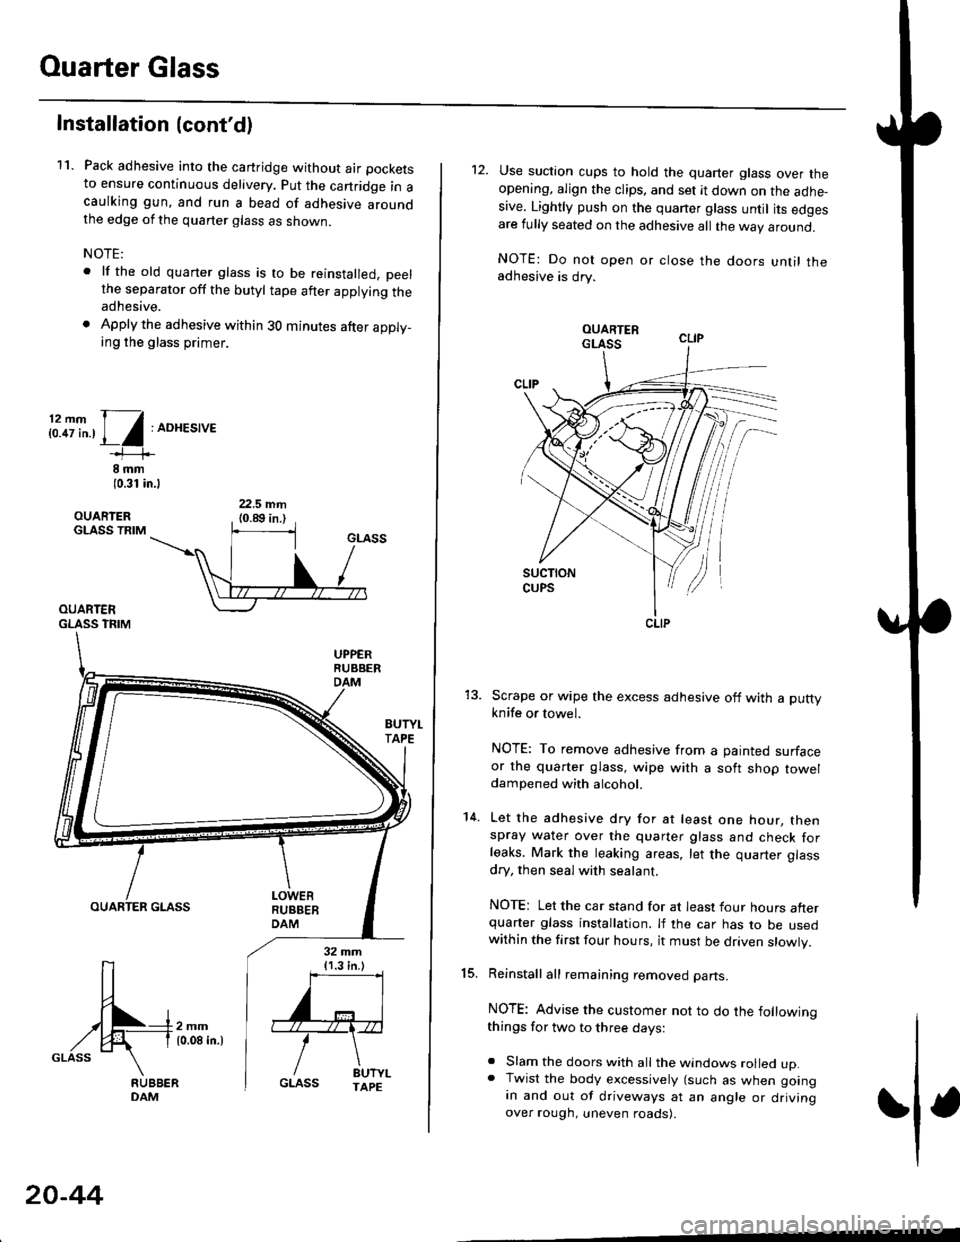 HONDA CIVIC 2000 6.G Workshop Manual Ouarter Glass
Installation (contd)
11. Pack adhesive into the cartridge without air pockets
to ensure continuous delivery. put the canridge in acaulking gun, and run a bead of adhesive aroundthe edge